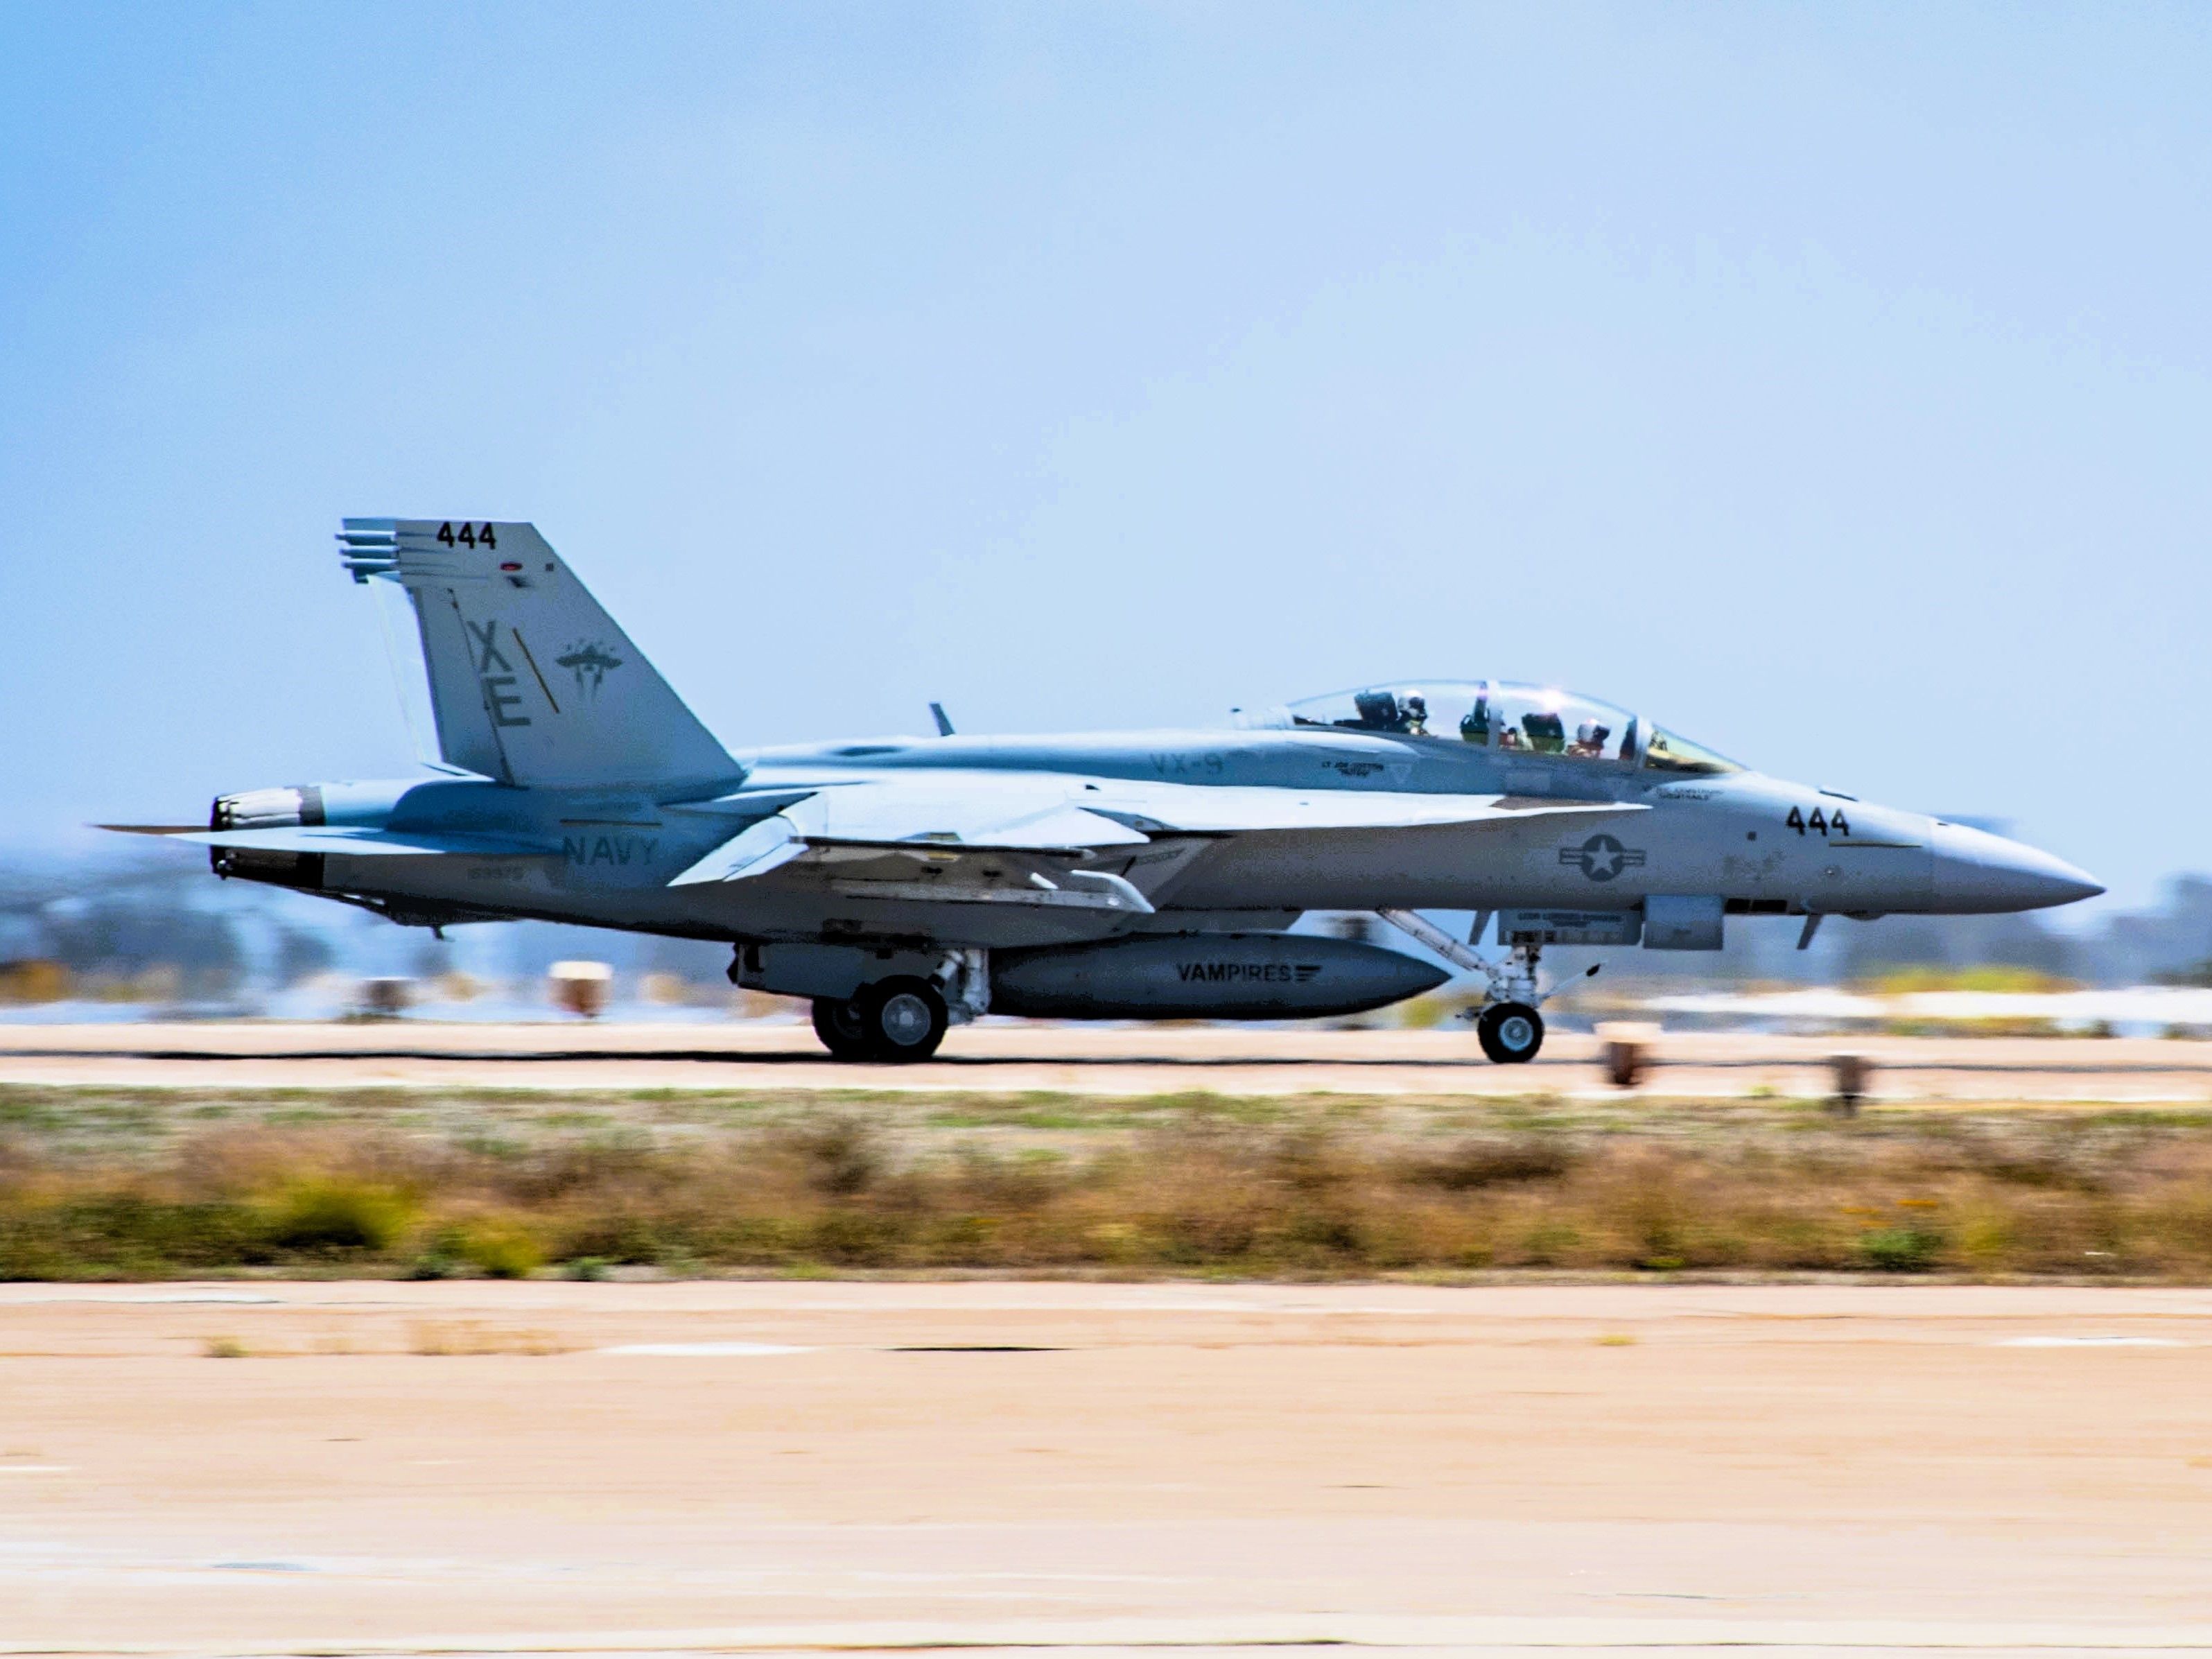 7187927 (4x3) - F/A-18F Block III Super Hornet assigned to VX-9 [Image 3 of 5]